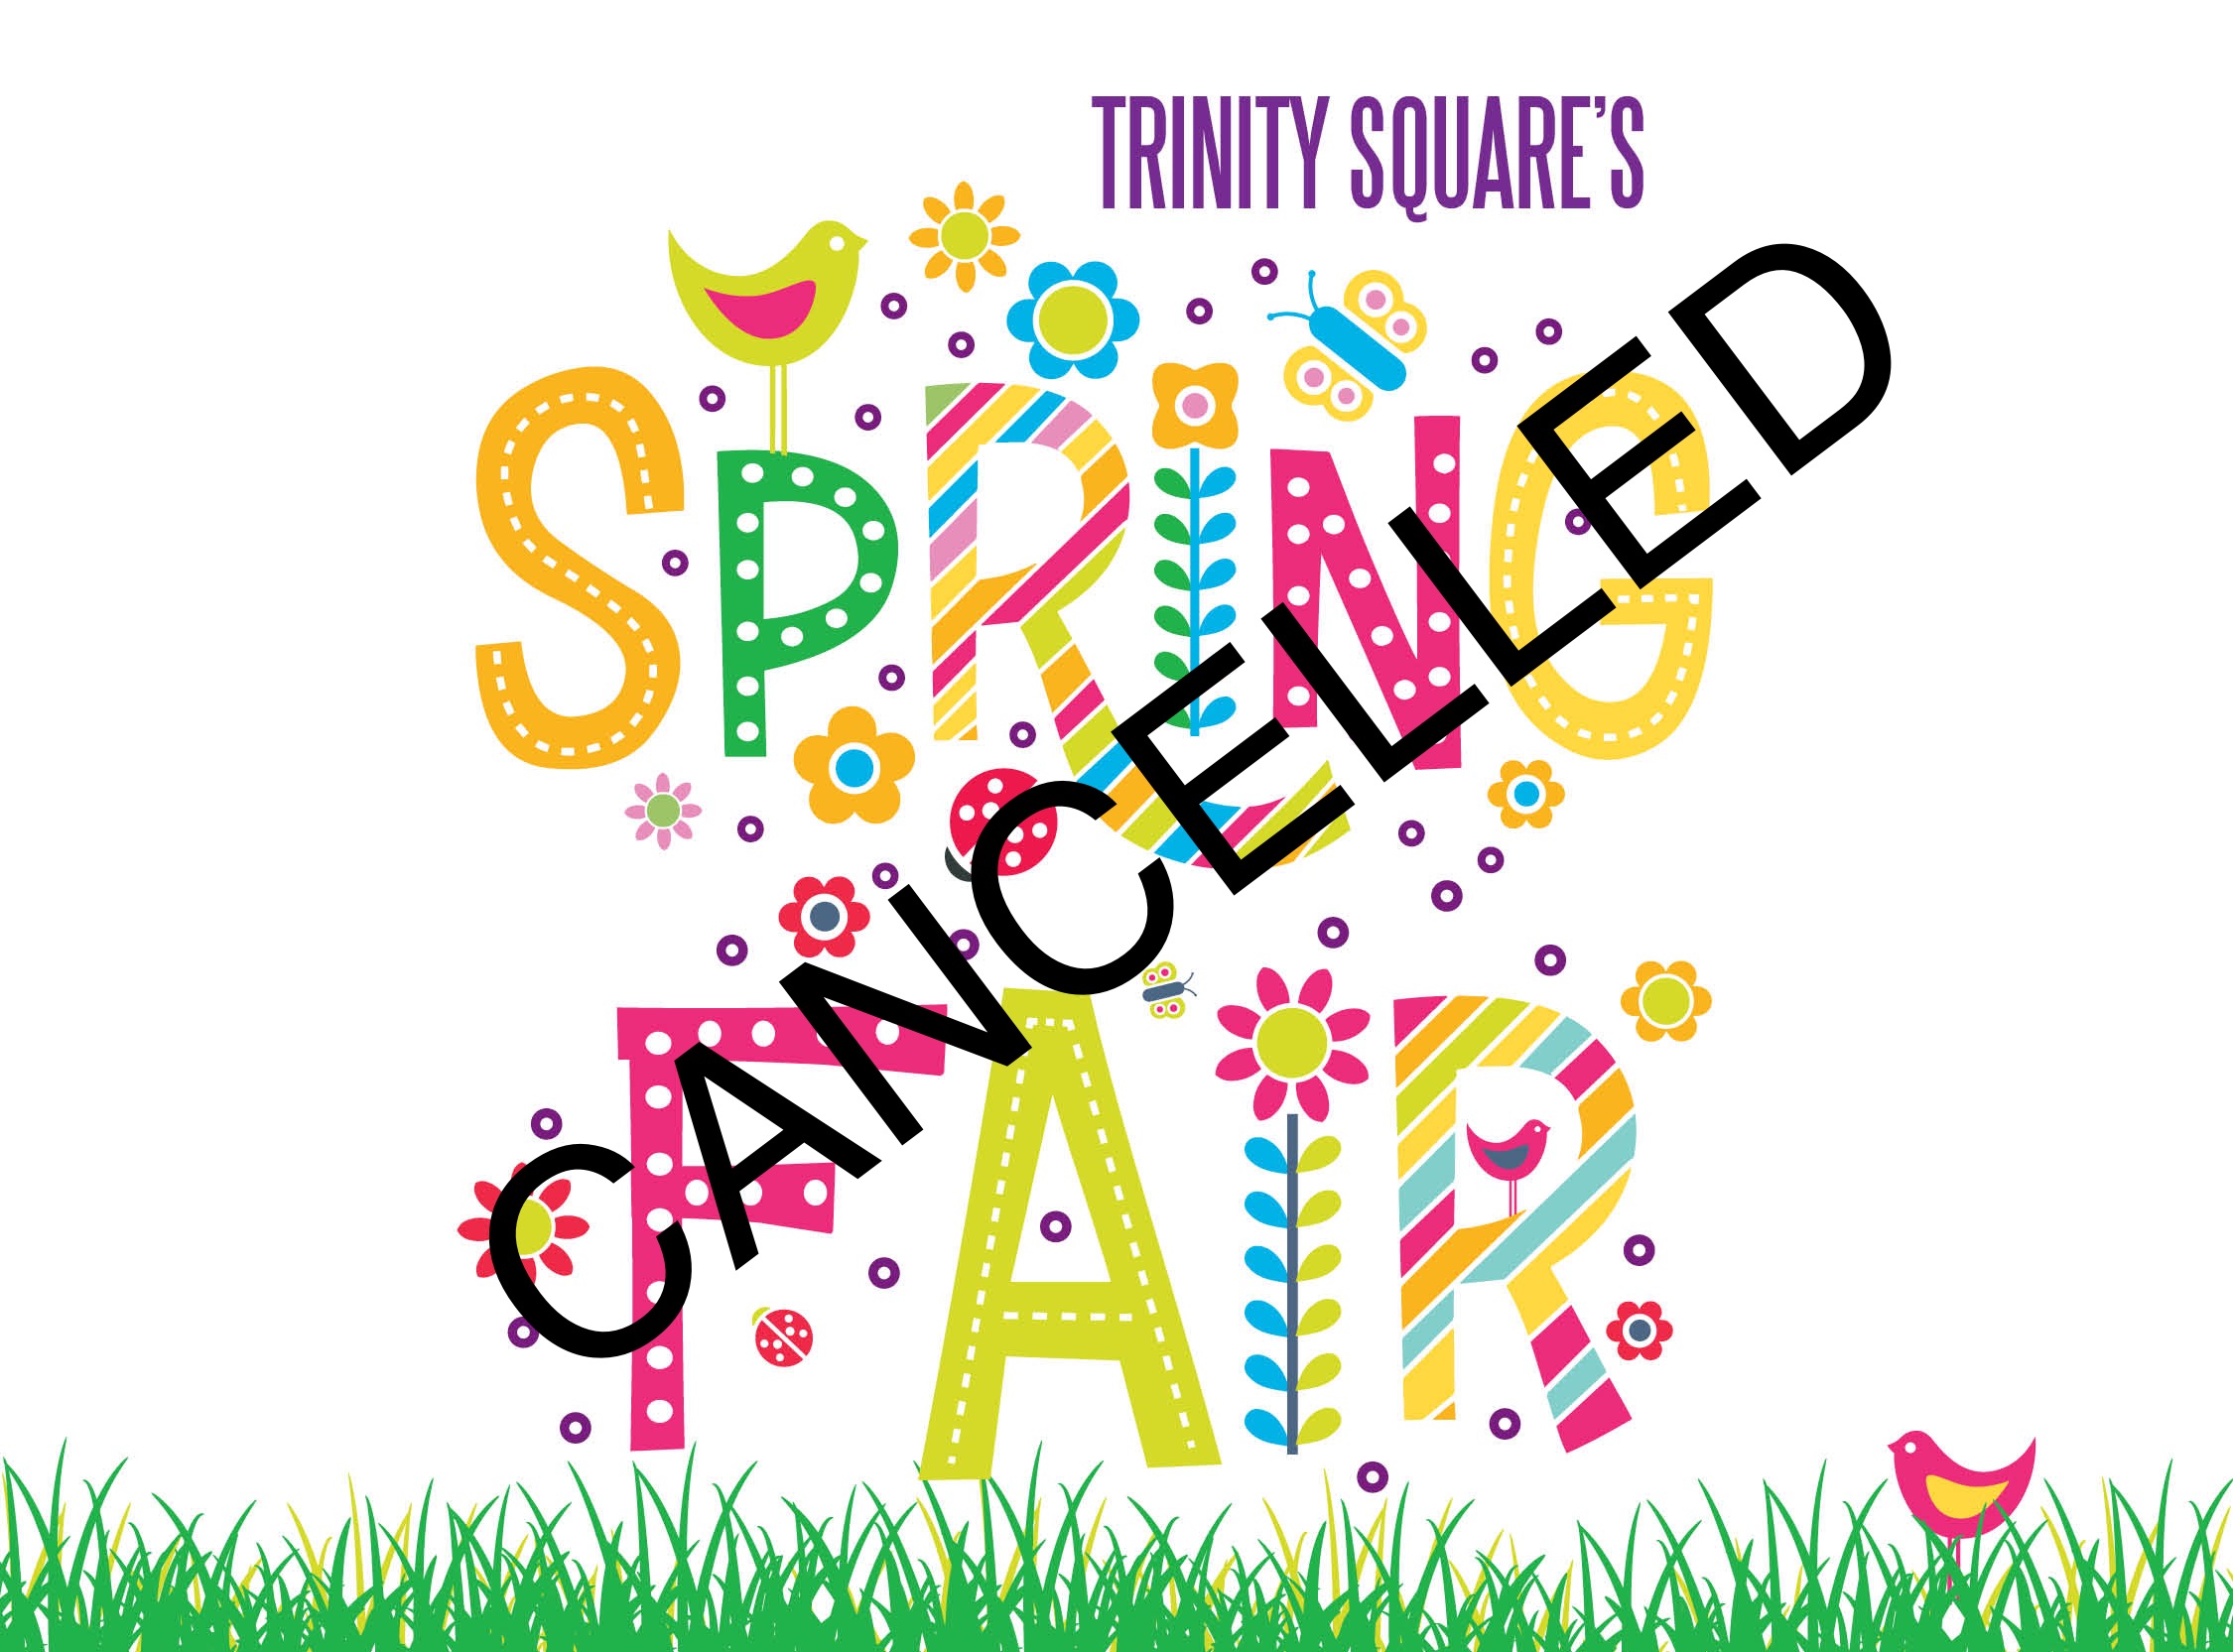 SPRING FAIR TODAY CANCELLED – SATURDAY 23RD MARCH